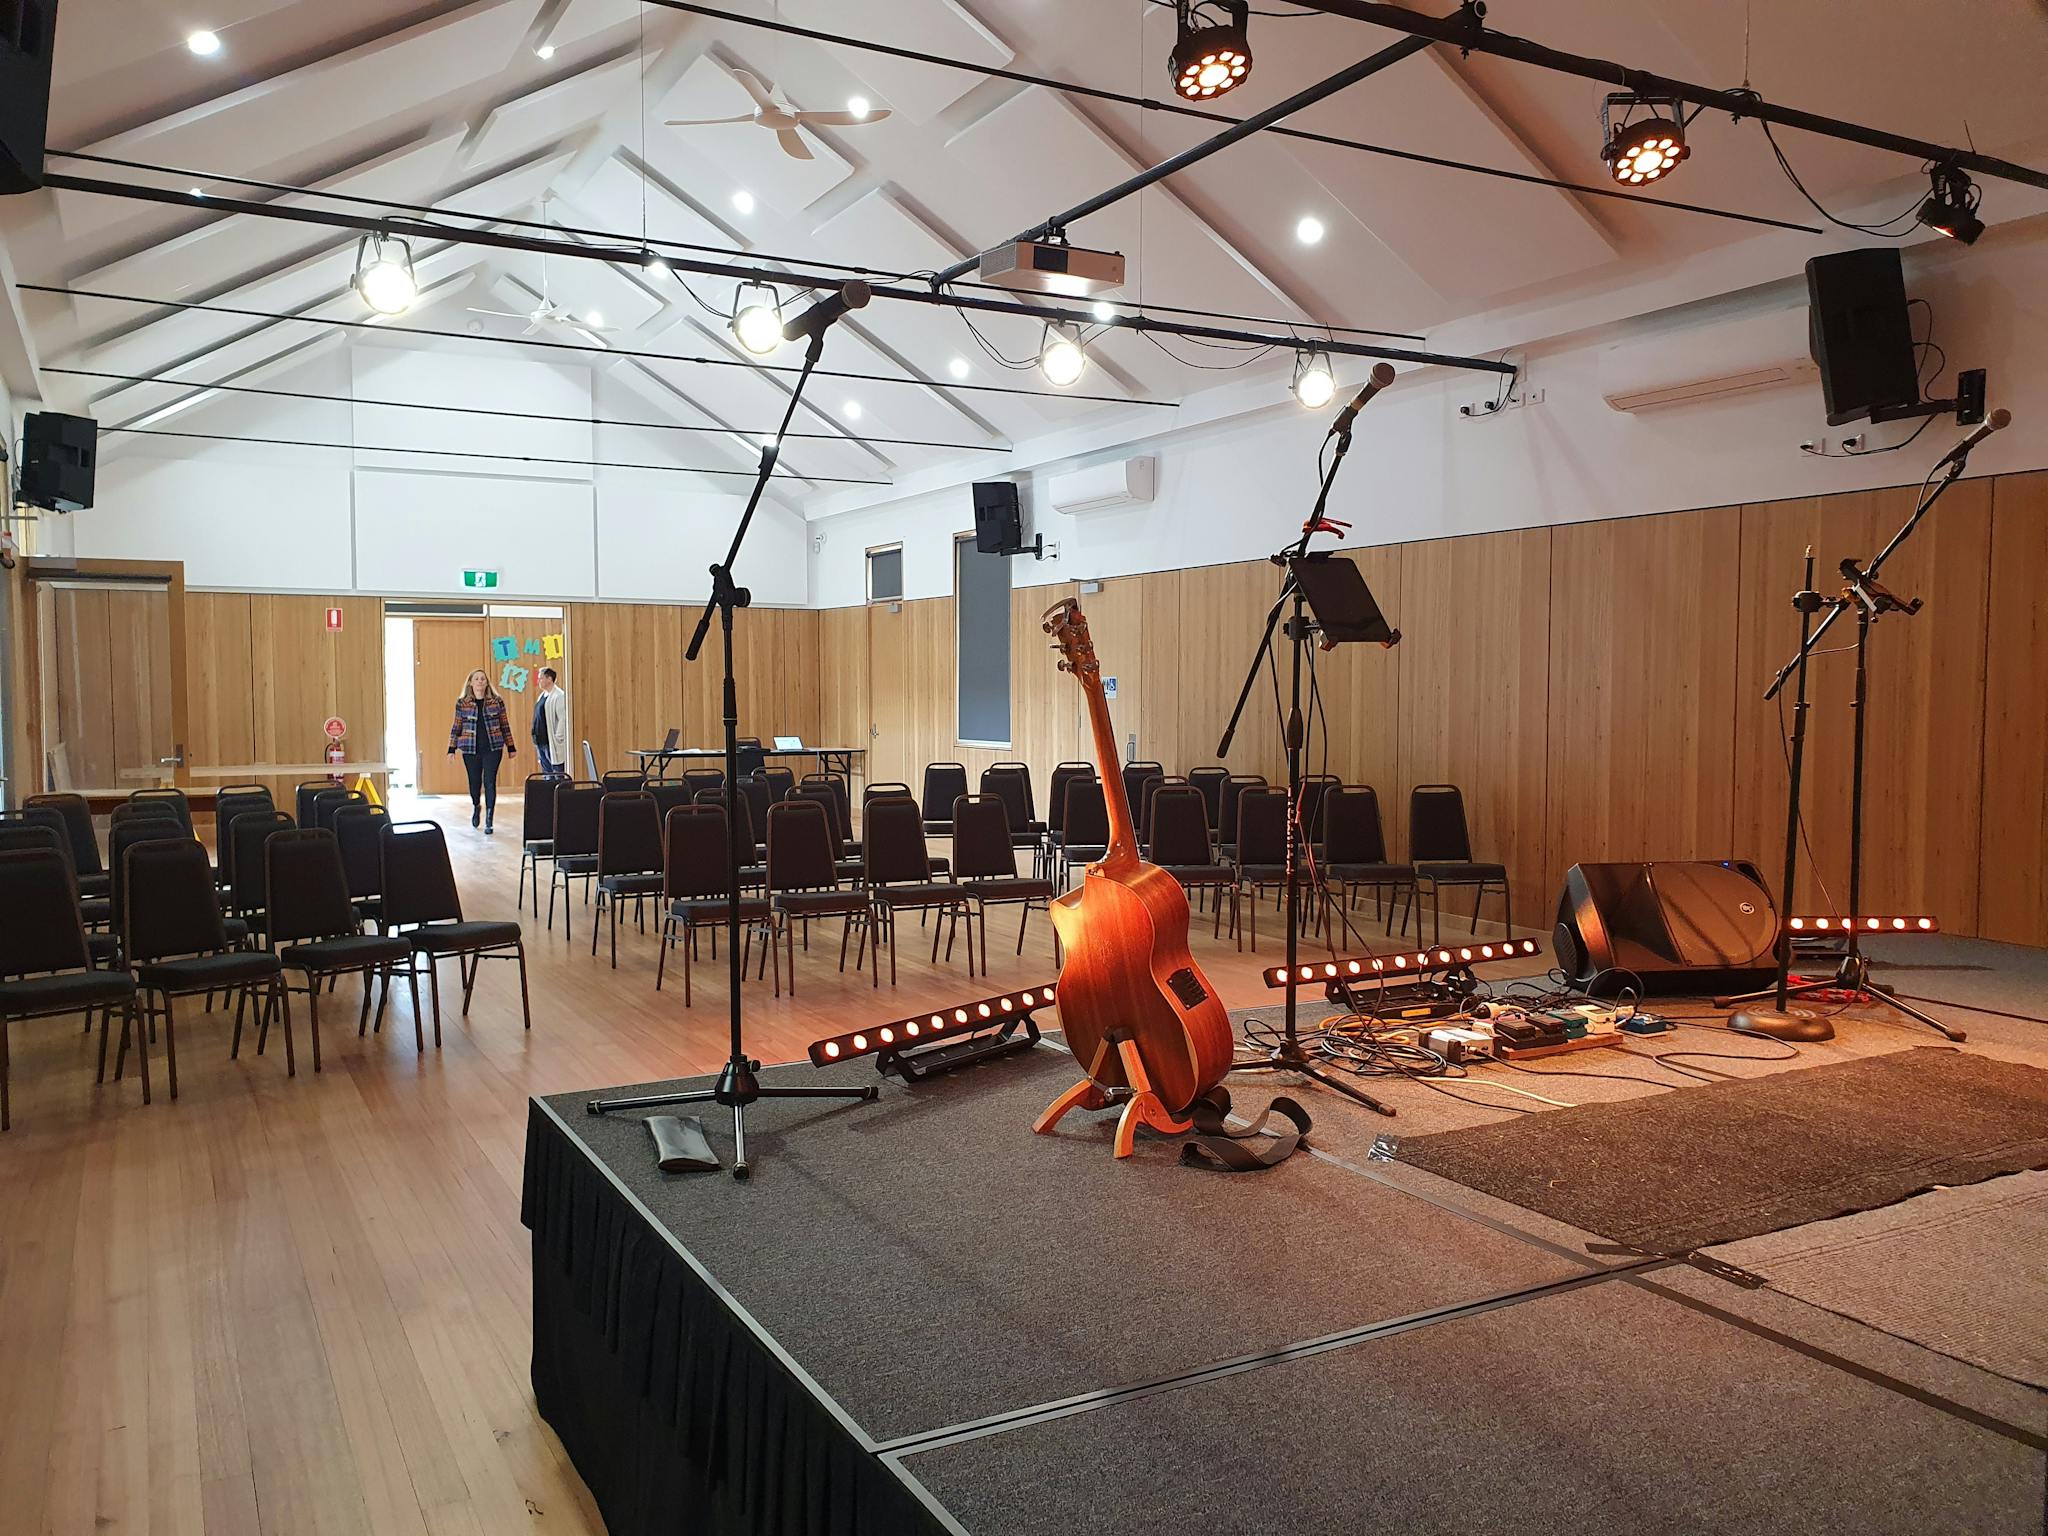 The main space, set up for a music performance